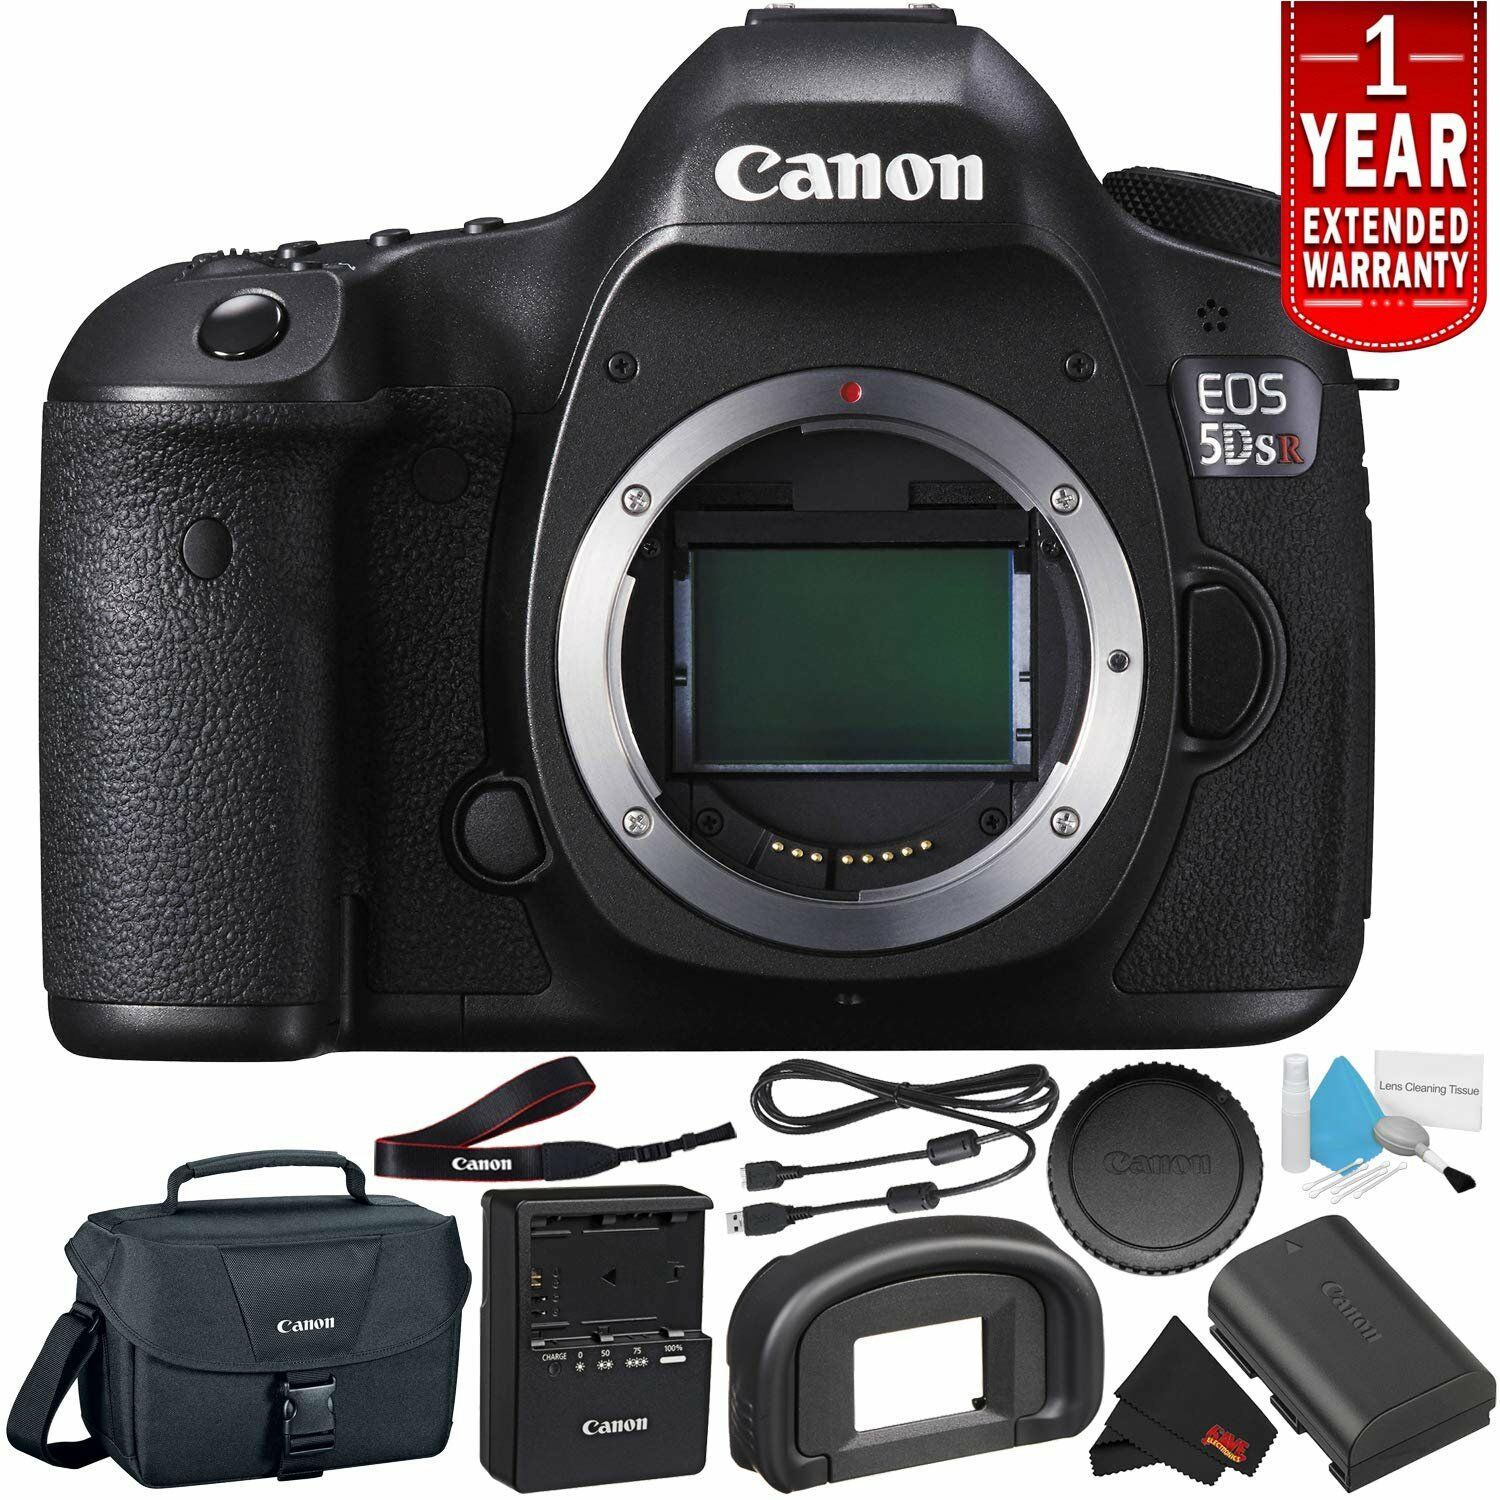 Canon EOS 5DS R Digital SLR Camera 0582C002 (Body Only) - Starter Bundle with 1 Year Extended Warranty + More - image 1 of 4